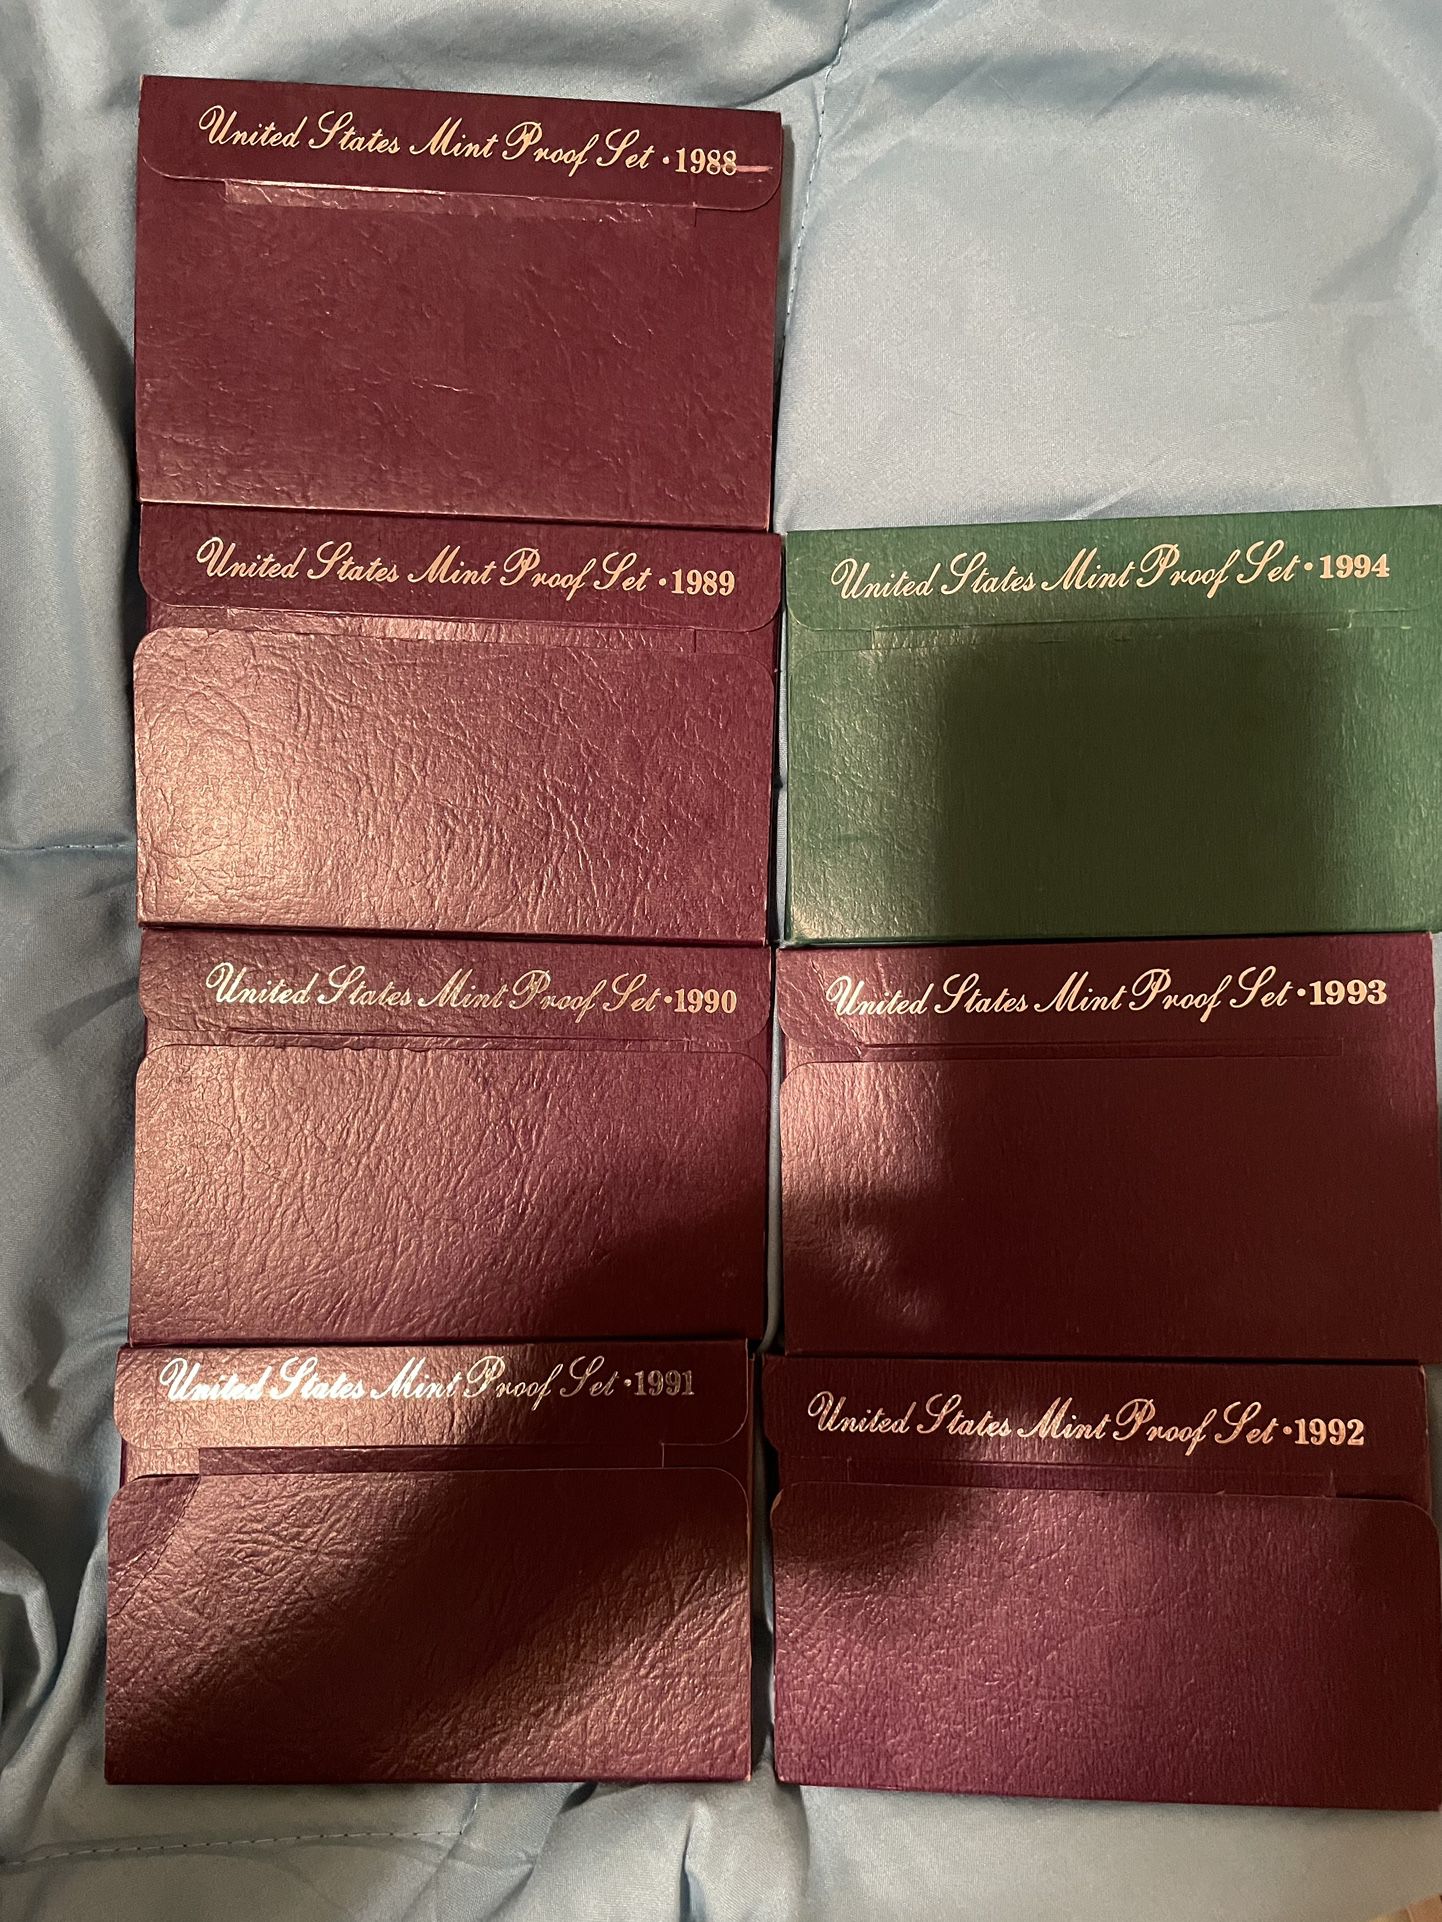 United States Mint Proof Set Years 1988 To 1994